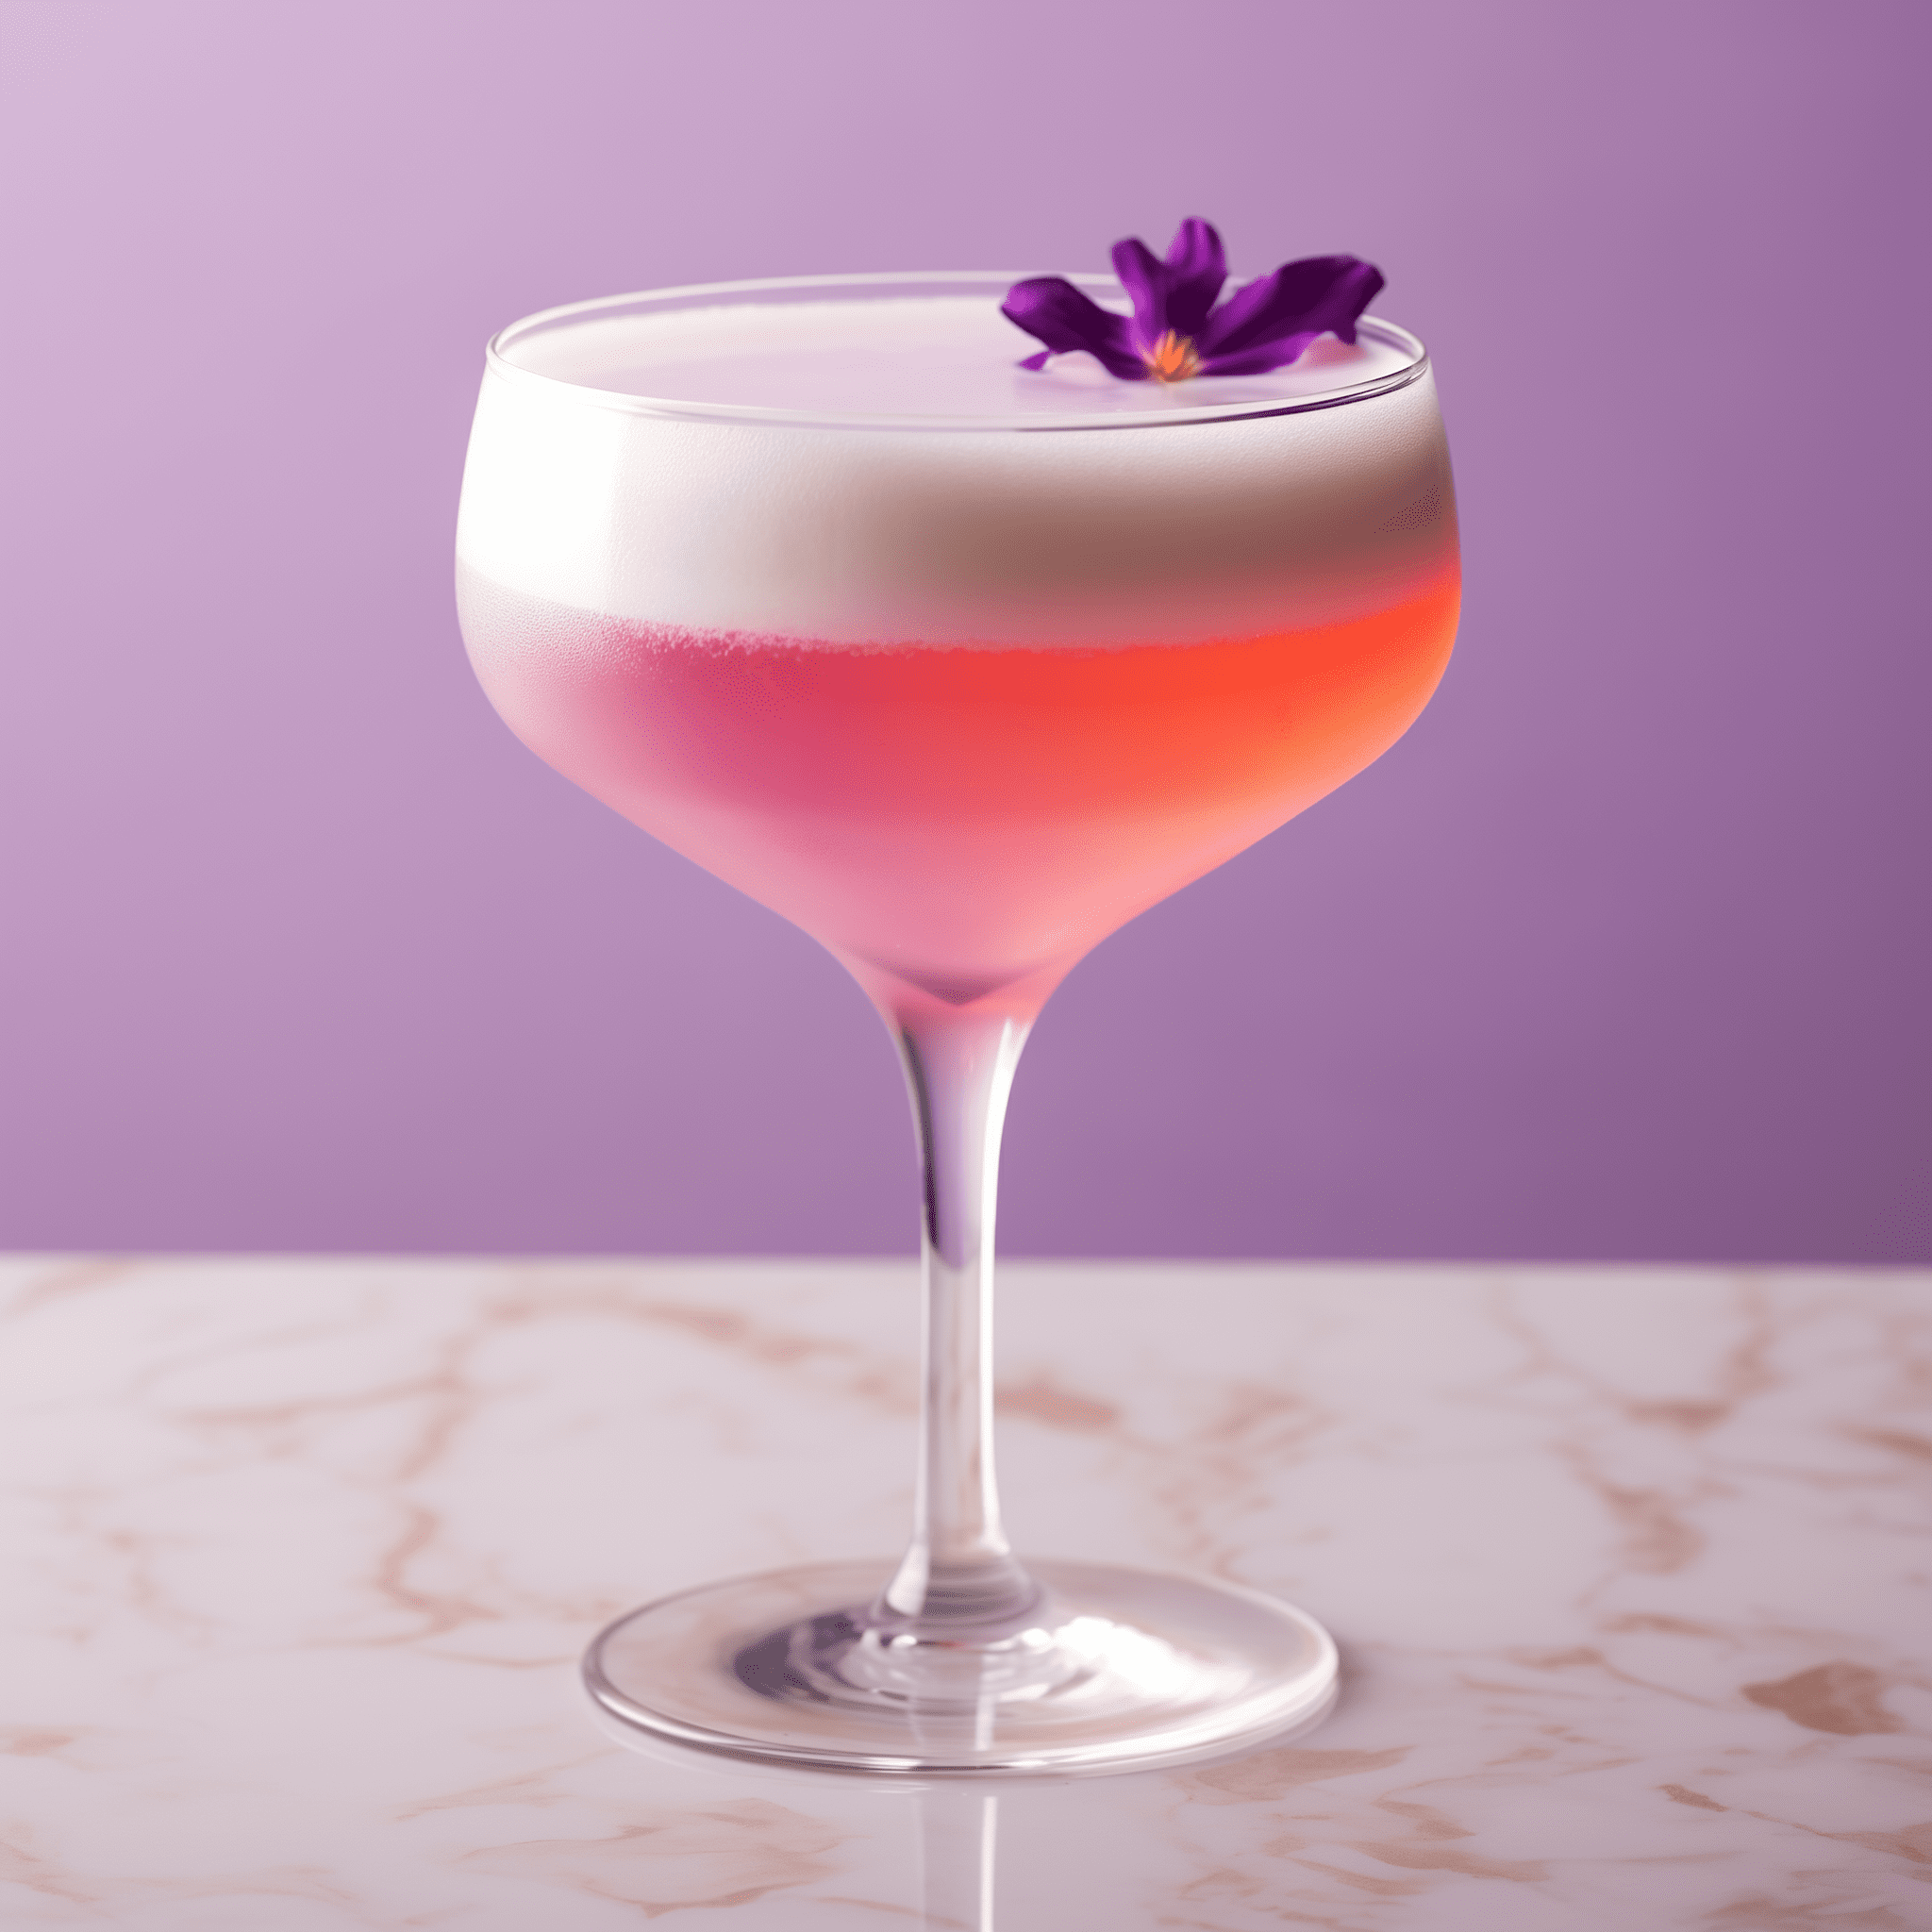 Love Bomb Cocktail Recipe - The Love Bomb is a delightful fusion of sweet and tart. The parfair amour lends a floral sweetness, while the gin provides a crisp botanical undertone. The lemon soda adds a refreshing fizz and a slight sourness that balances the drink, making it light and invigorating.